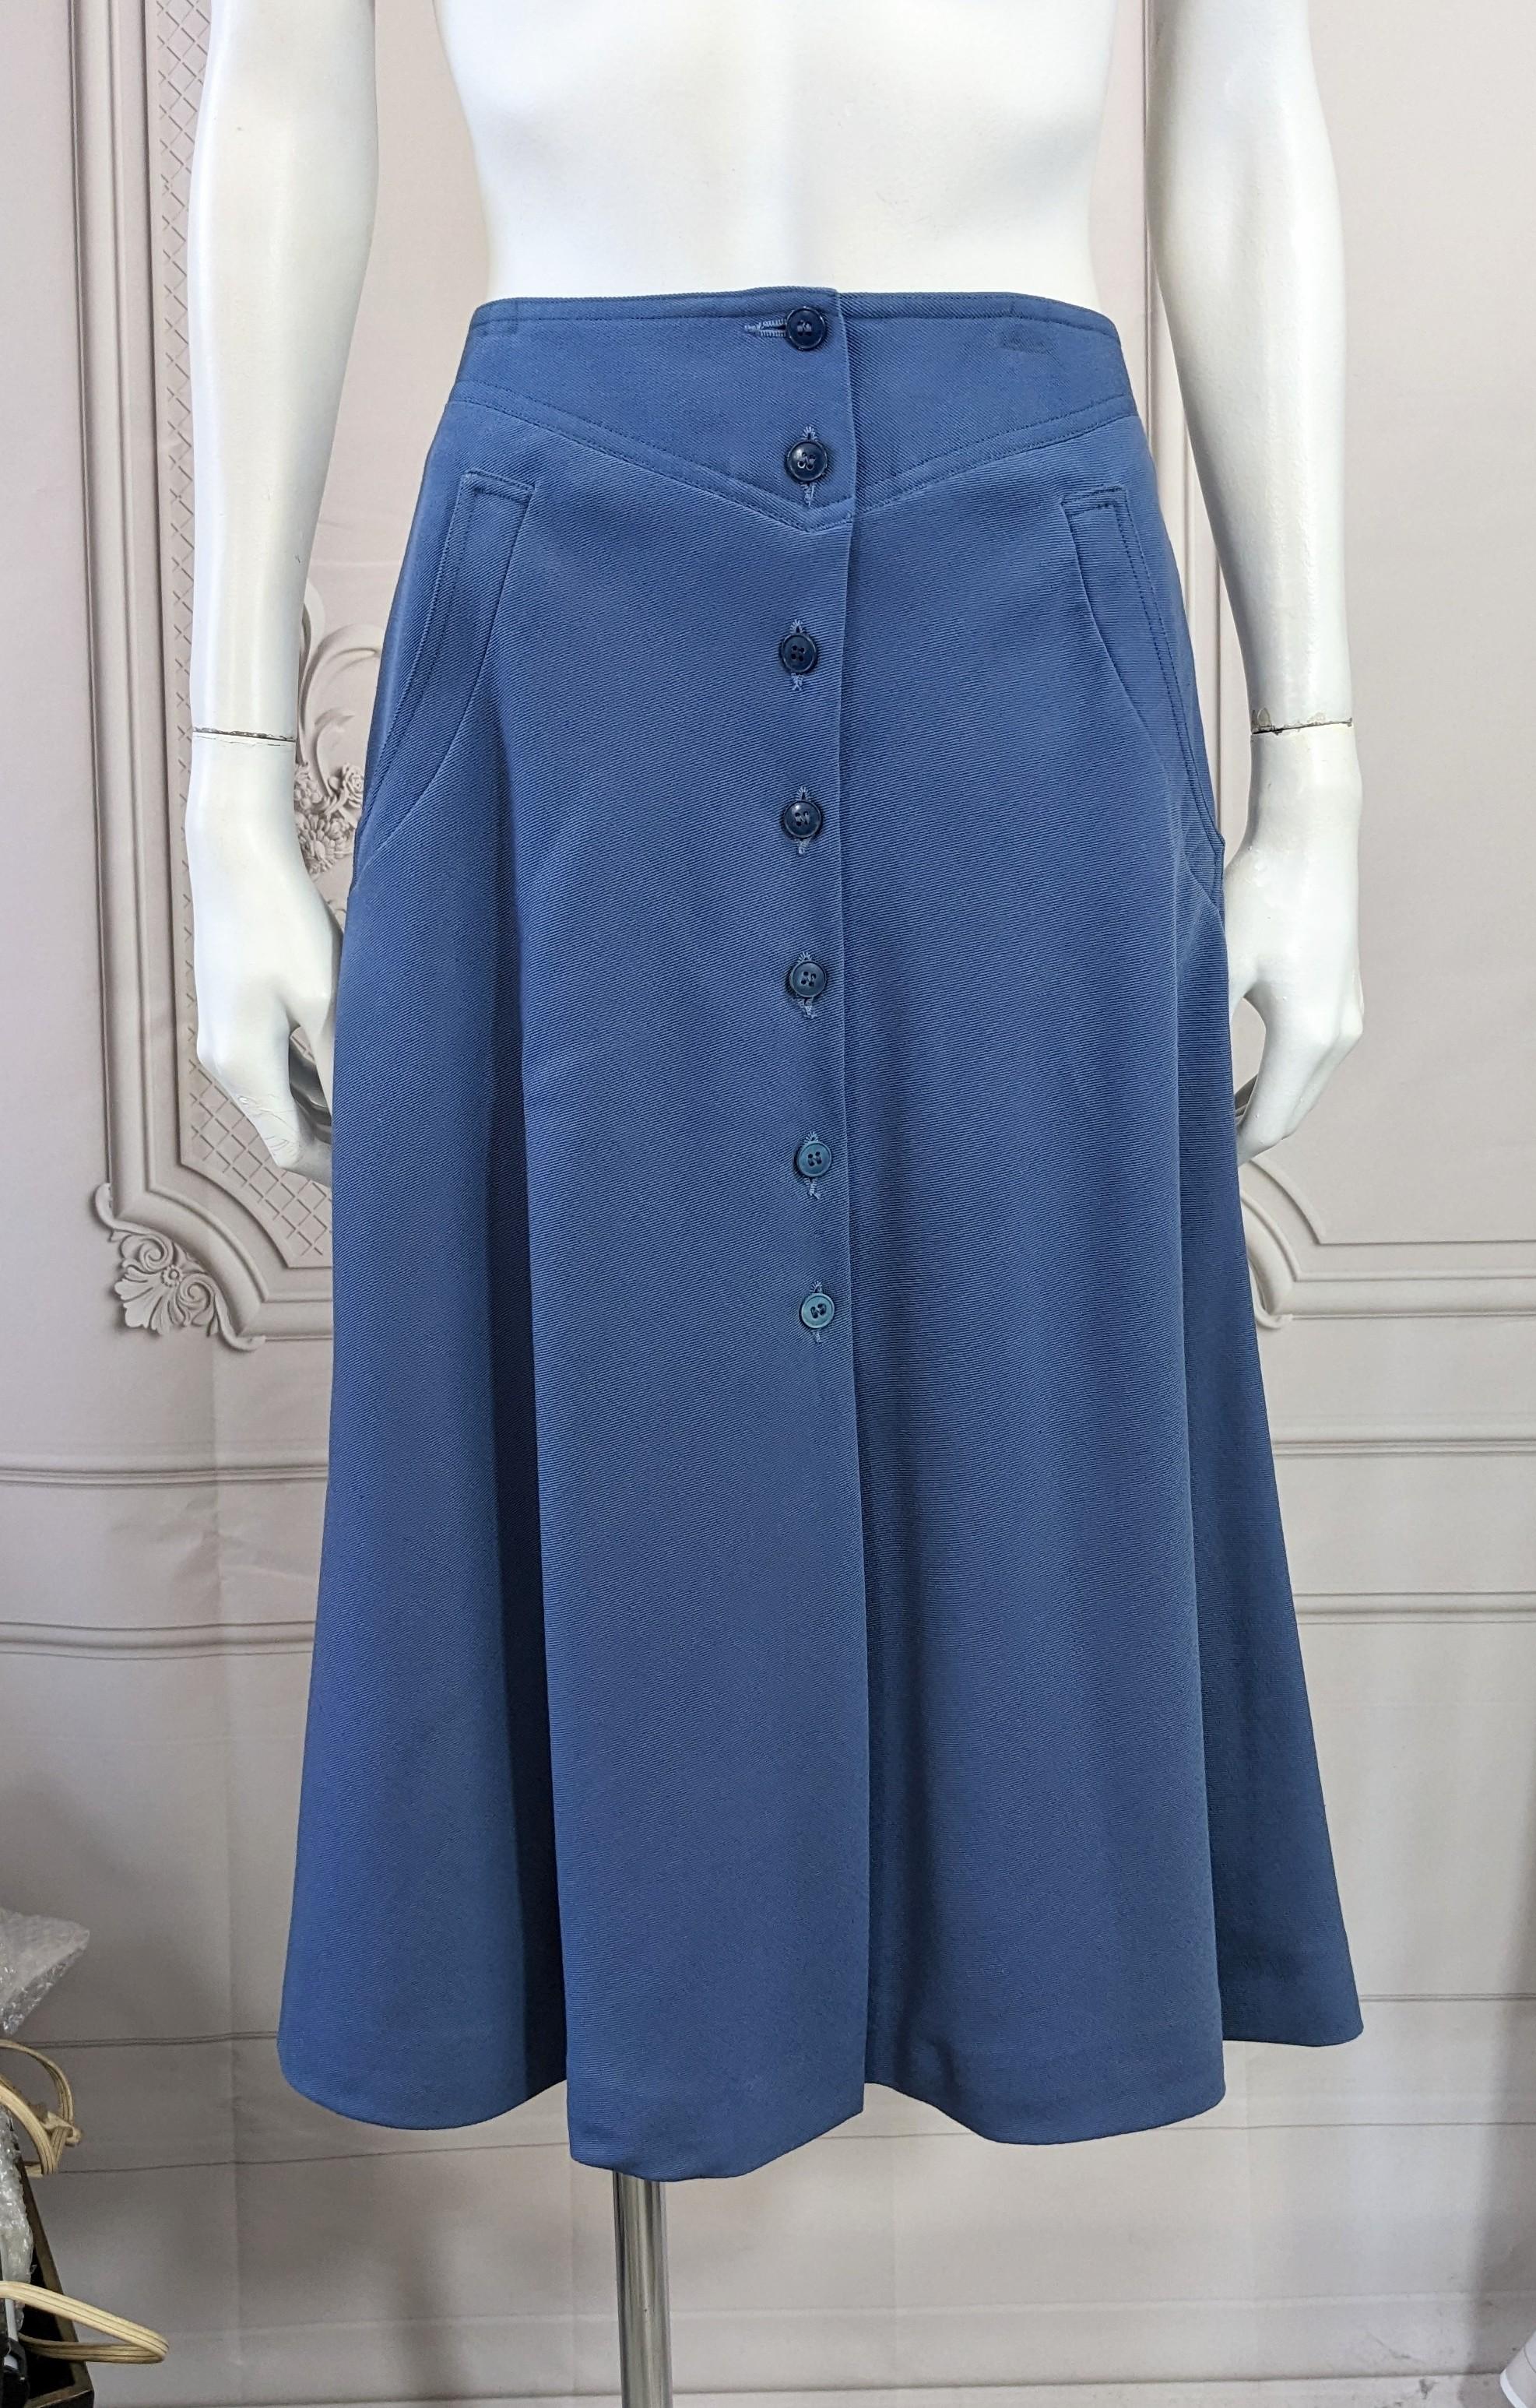 Cacharel Wool Twill A line Skirt with button front closures. Soft wool twill in a full A line shape with unusual curved pockets. Vintage size 10, Modern 0-2. Waist 26